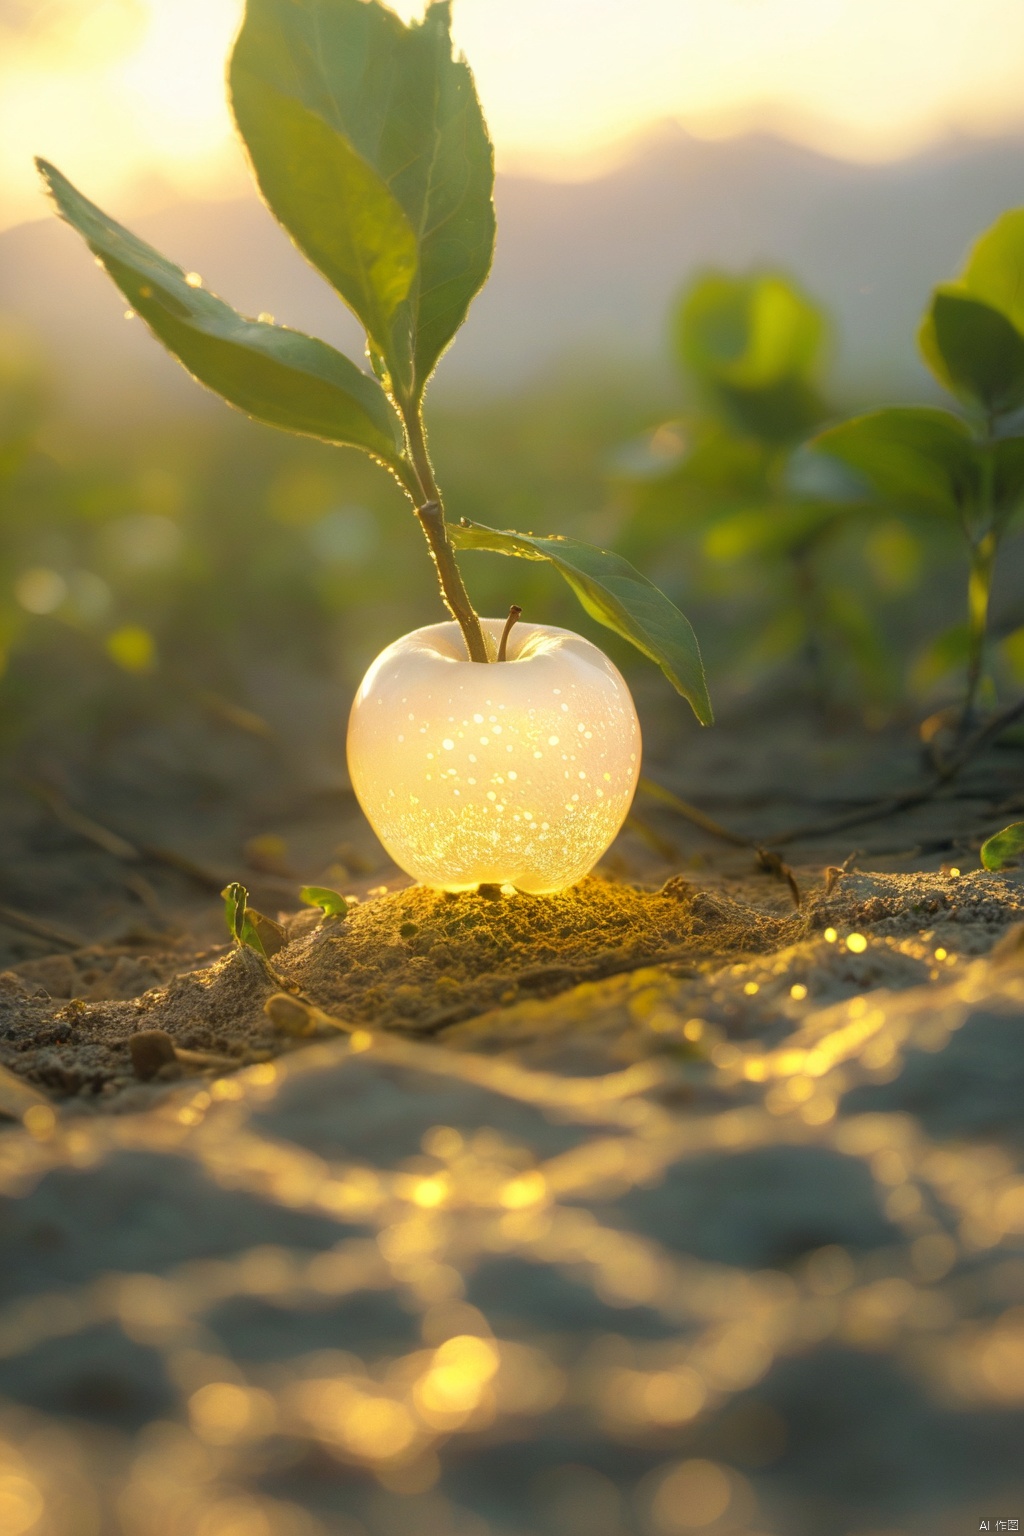  a delicate apple made of opal hung on branch in the early morning light, adorned with glistening dewdrops. in the background beautiful valleys, divine iridescent glowing, opalescent textures, volumetric light, ethereal, sparkling, light inside body, bioluminescence, studio photo, highly detailed, sharp focus, Oriental flat aesthetics